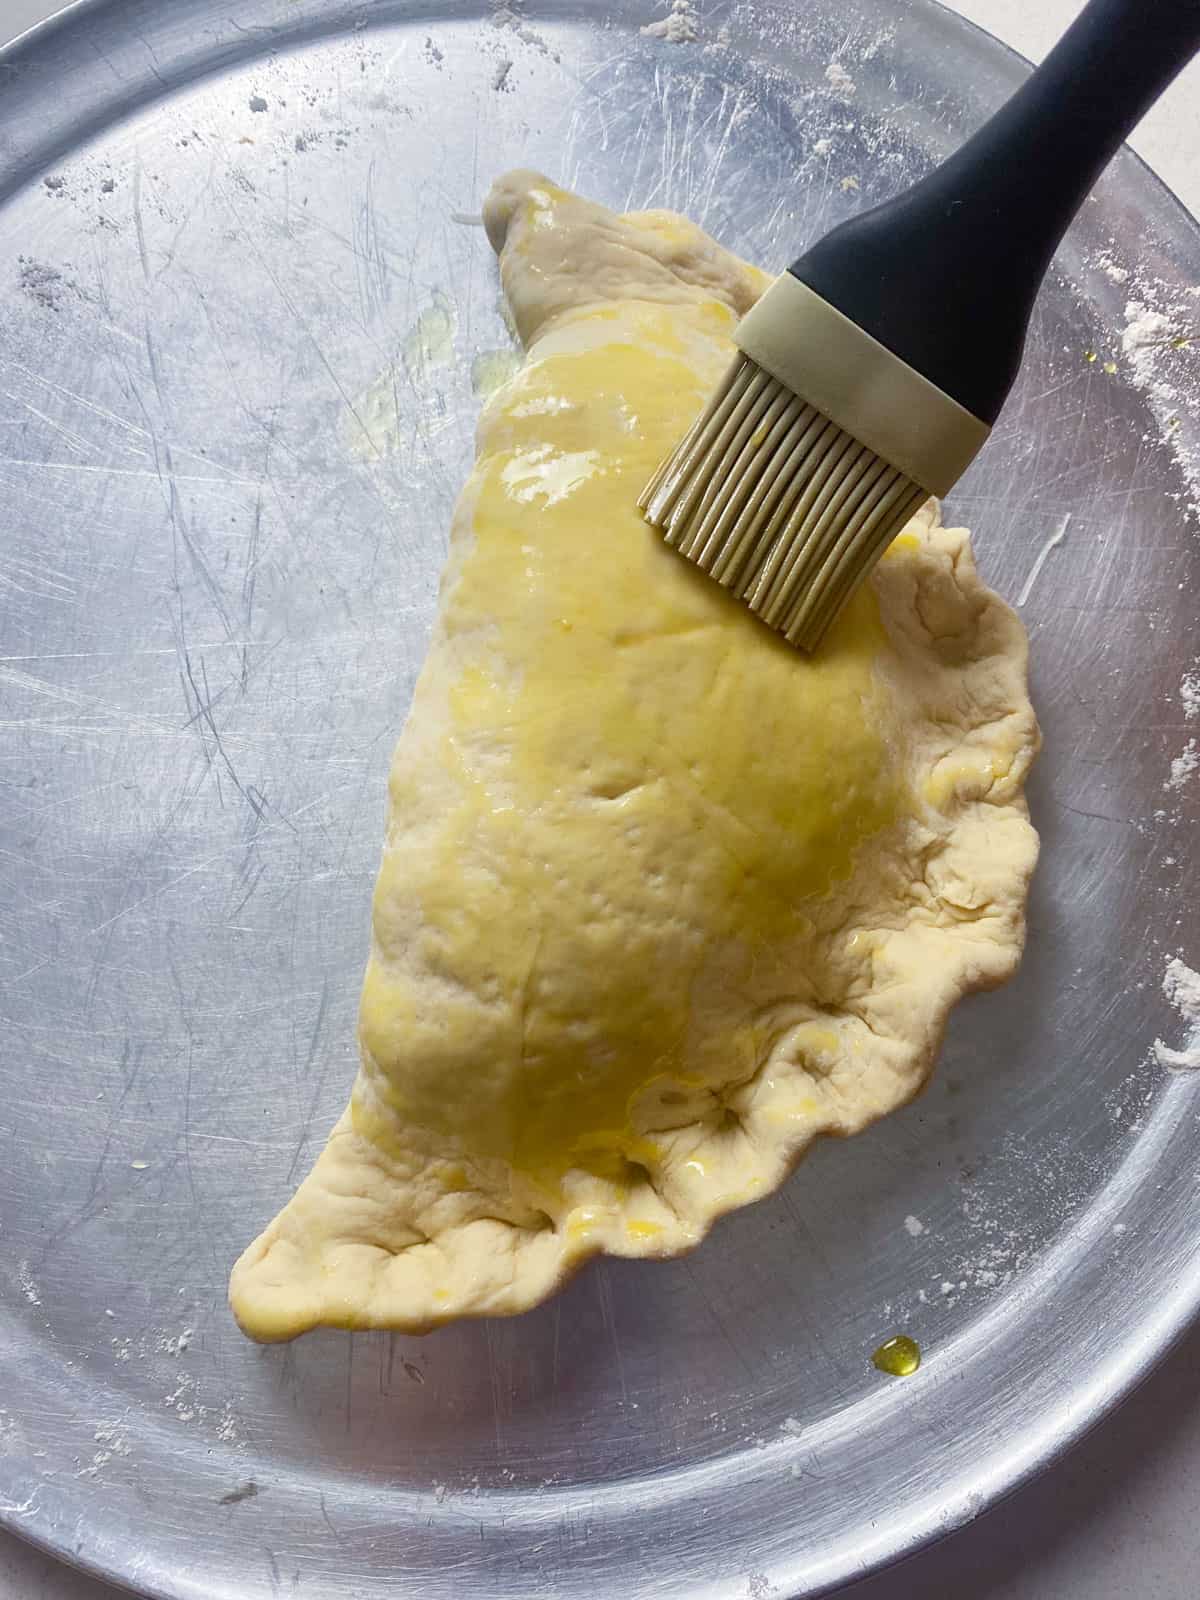 Brush olive oil onto the folded calzone before baking in the oven.